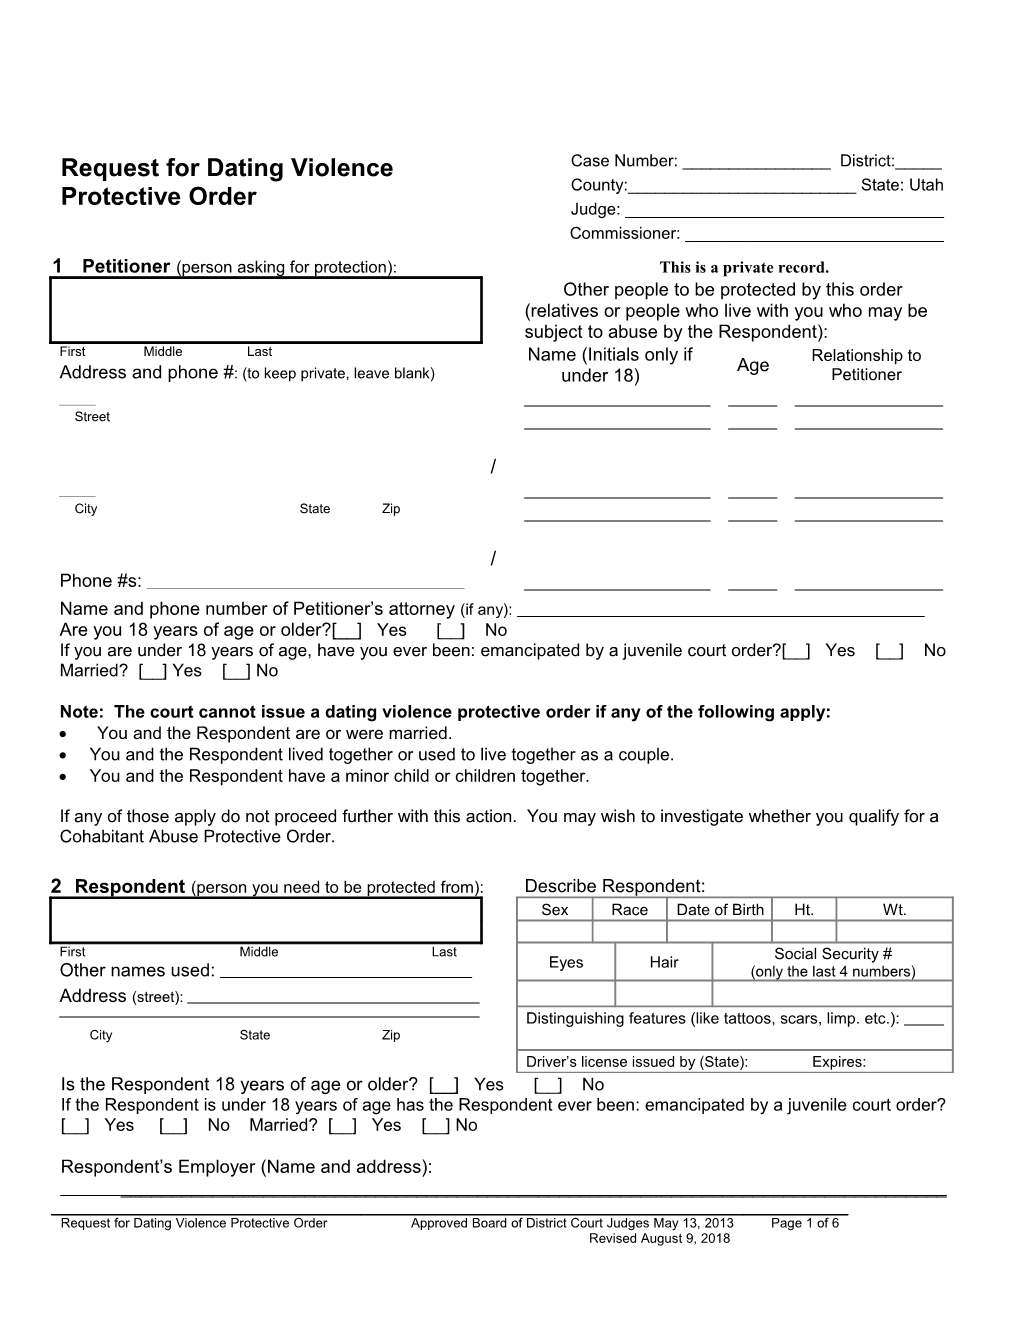 Request for Dating Violence Protective Order